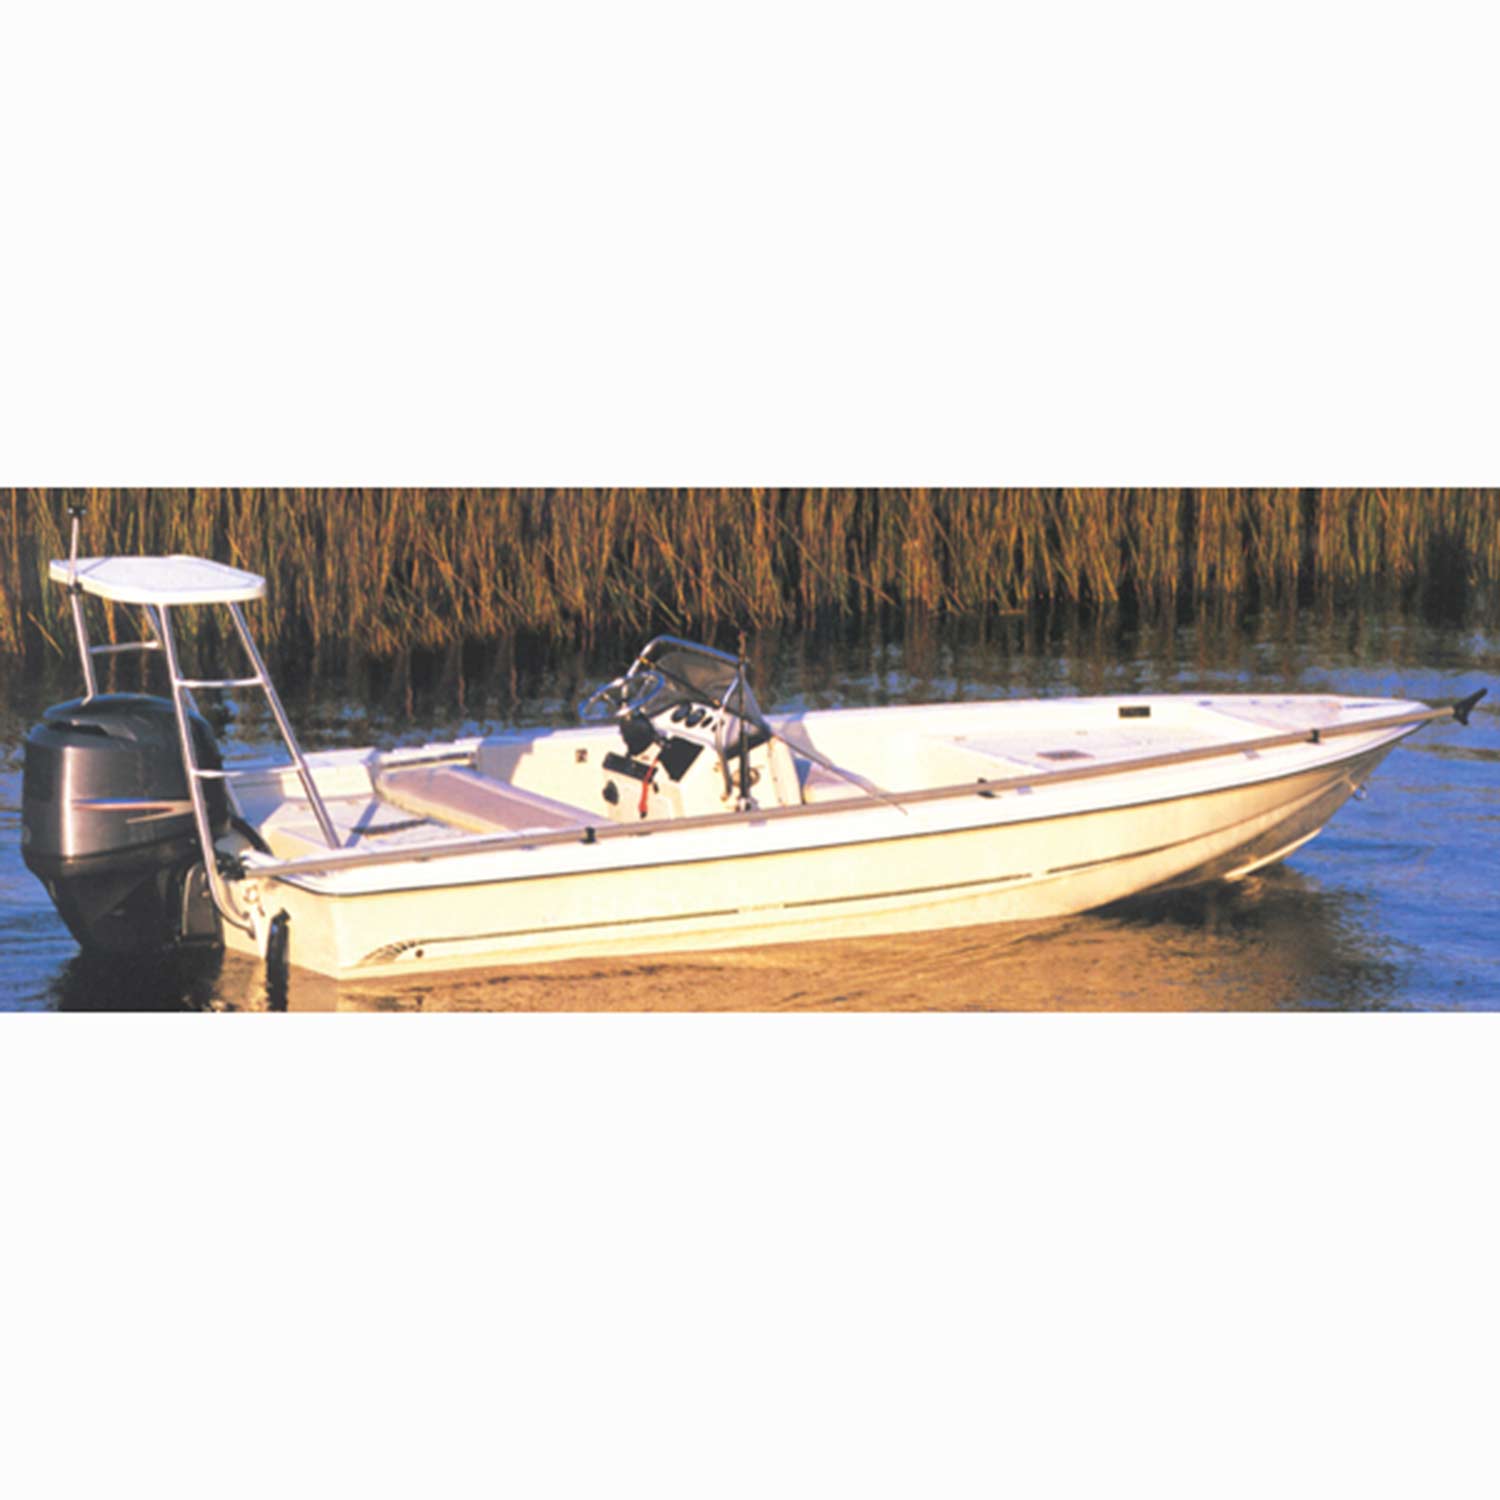 Styled-to-Fit Boat Cover for Aluminum V-Hull Fishing Boats with Walk-Thru Windshield by Carver | Products at West Marine